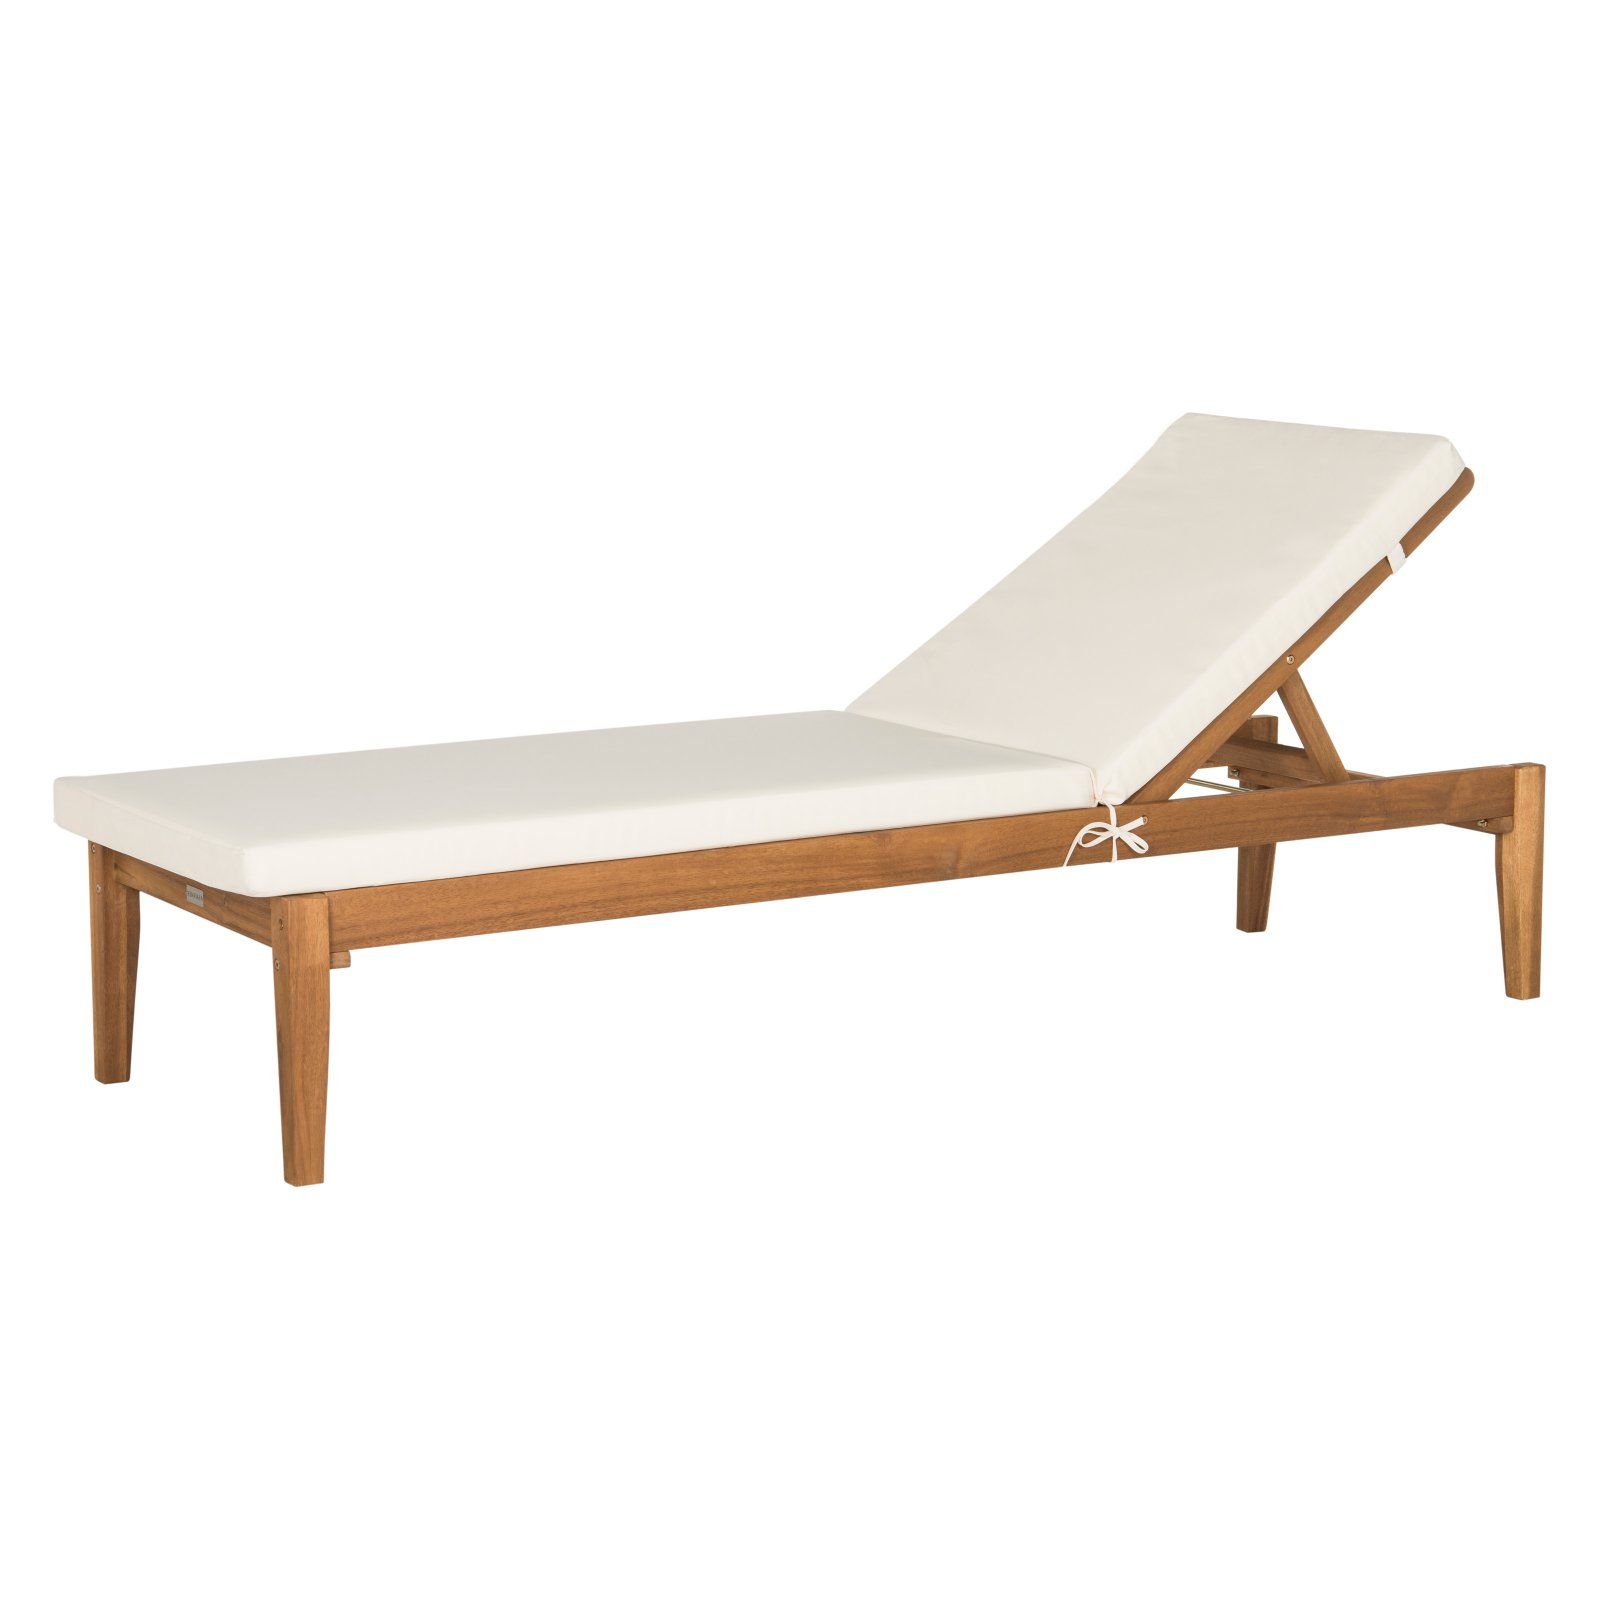 Widely Used Havenside Home Surfside Relaxer Chaise Lounges Regarding Safavieh Arcata Sunlounger Outdoor Chaise Lounge Chair In (View 22 of 25)